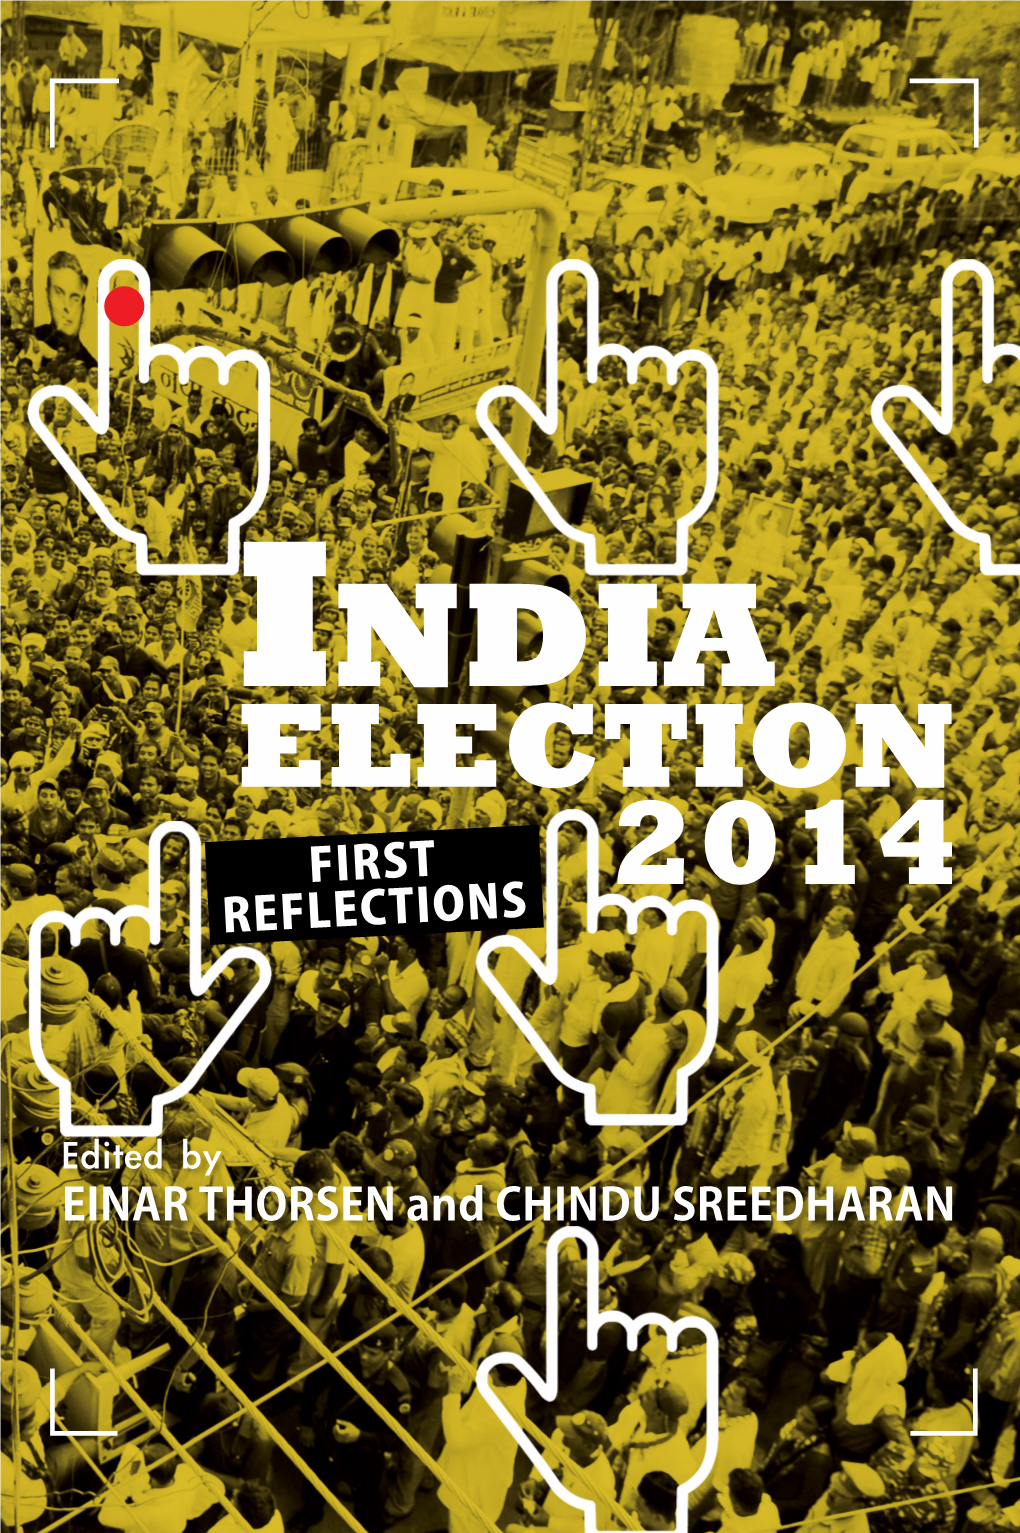 Election 2014 First Reflections